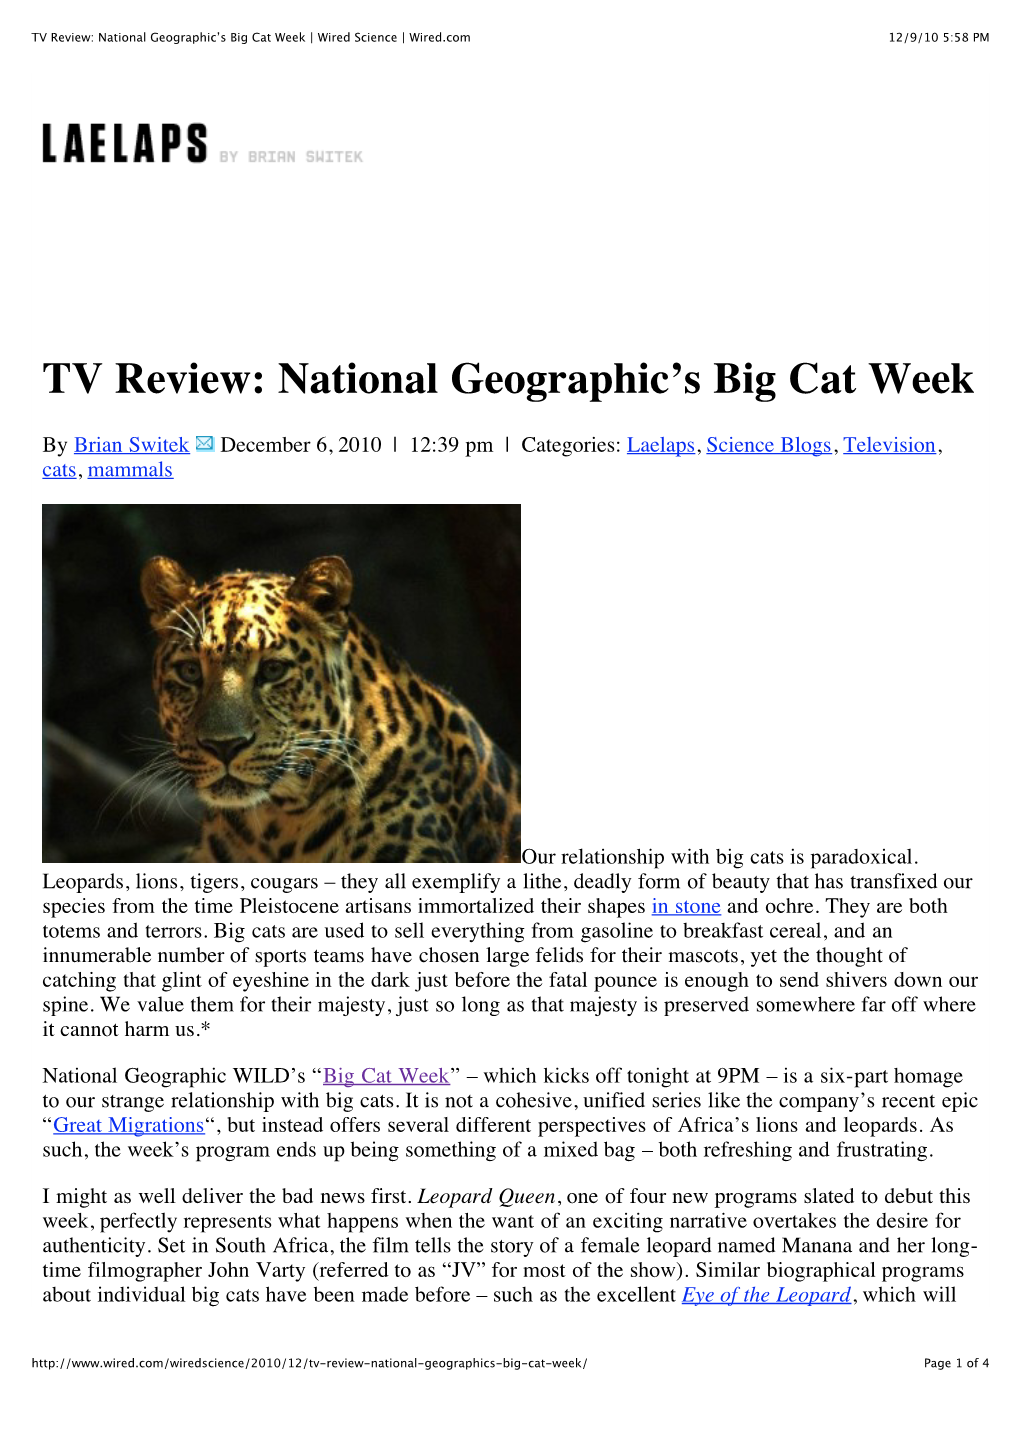 TV Review National Geographic's Big Cat Week | Wired Science